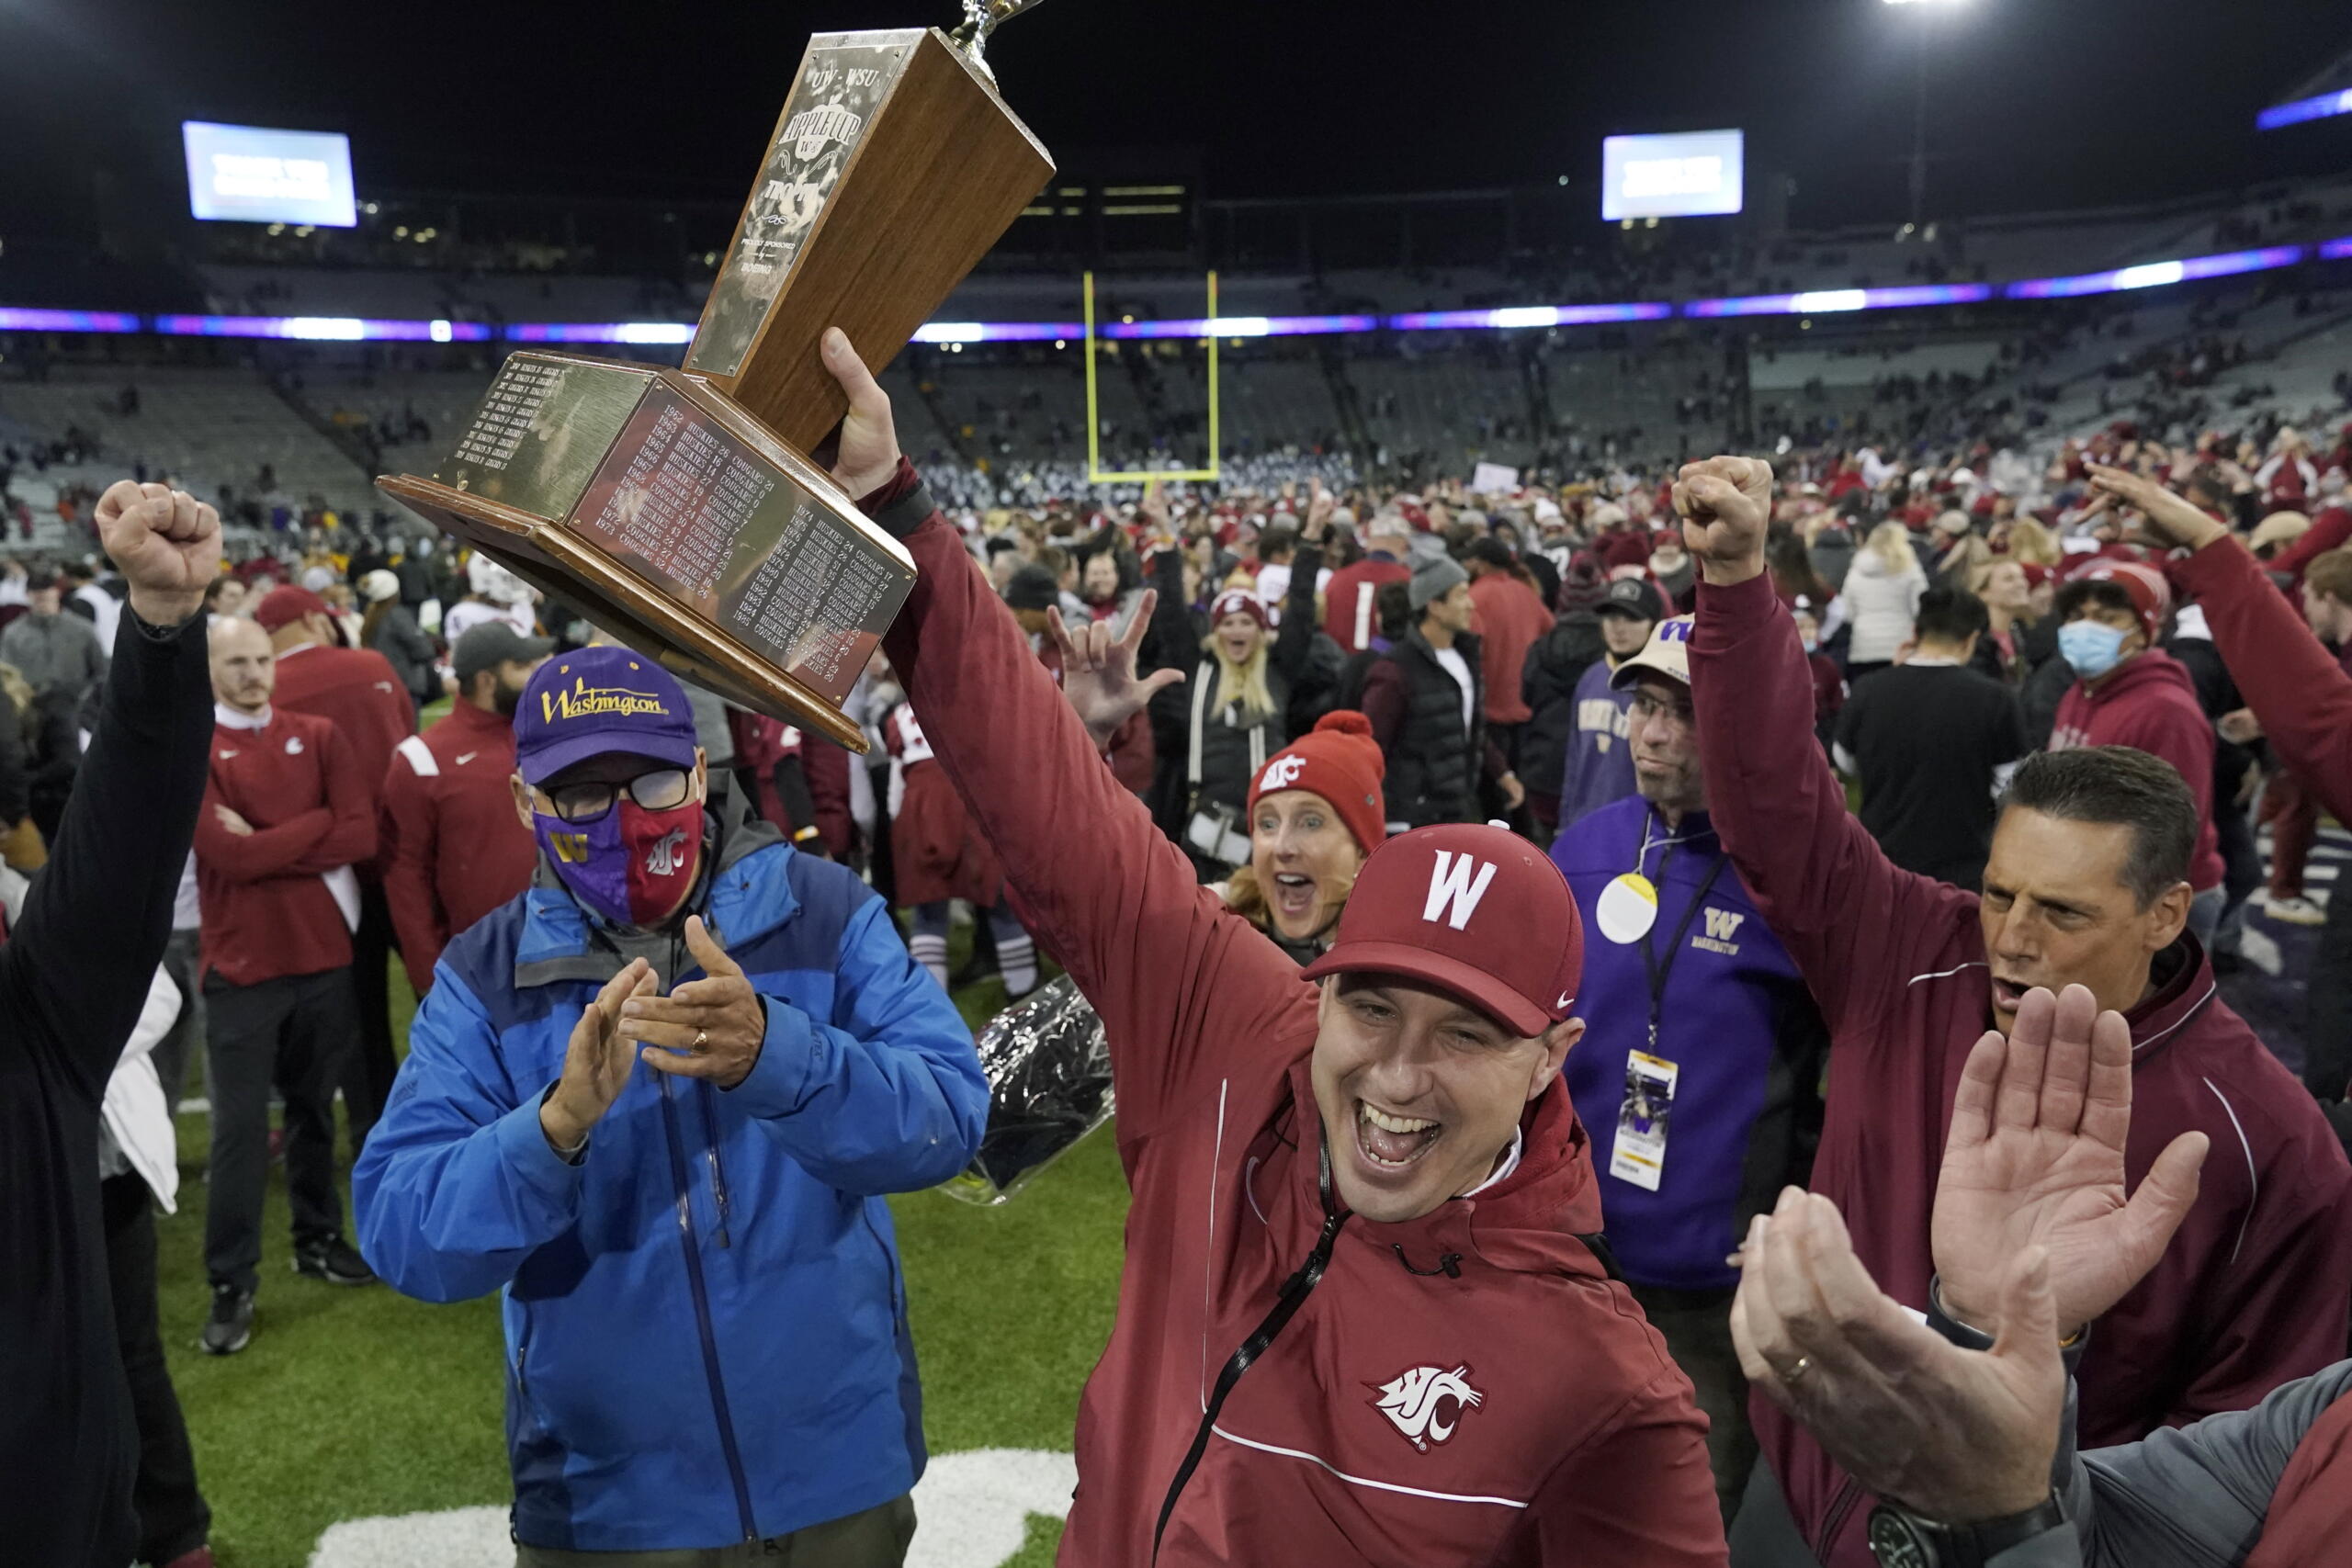 Washington State acting head coach Jake Dickert, center, holds up the Apple Cup Trophy after it was presented to him by Washington Gov. Jay Inslee, left, after Washington State beat Washington 40-13 in an NCAA college football game, Friday, Nov. 26, 2021, in Seattle. (AP Photo/Ted S.